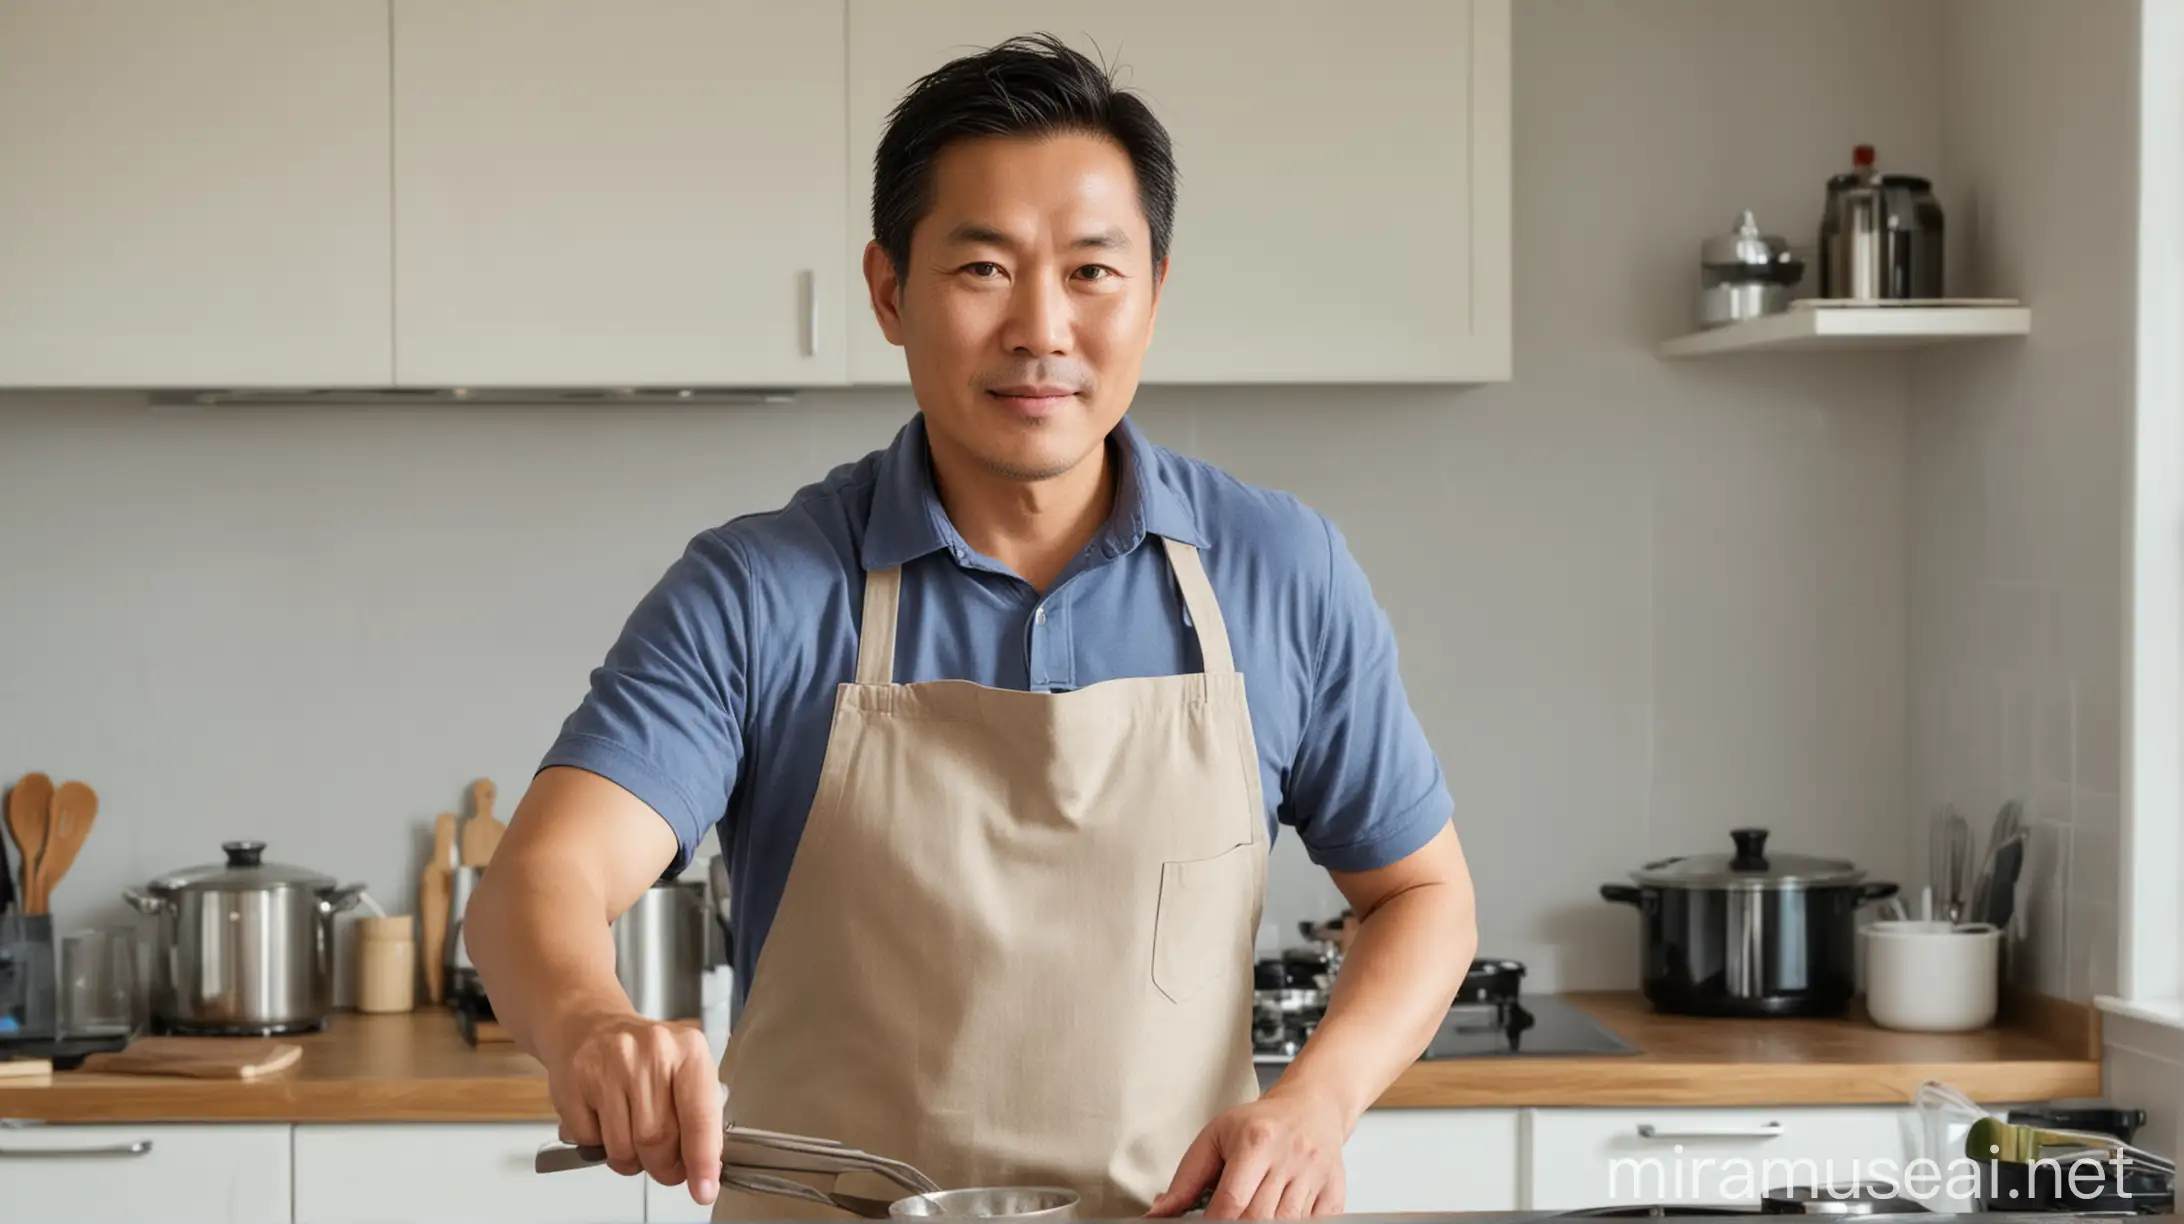 Asian MiddleAged Man Cooking in Kitchen with Apron